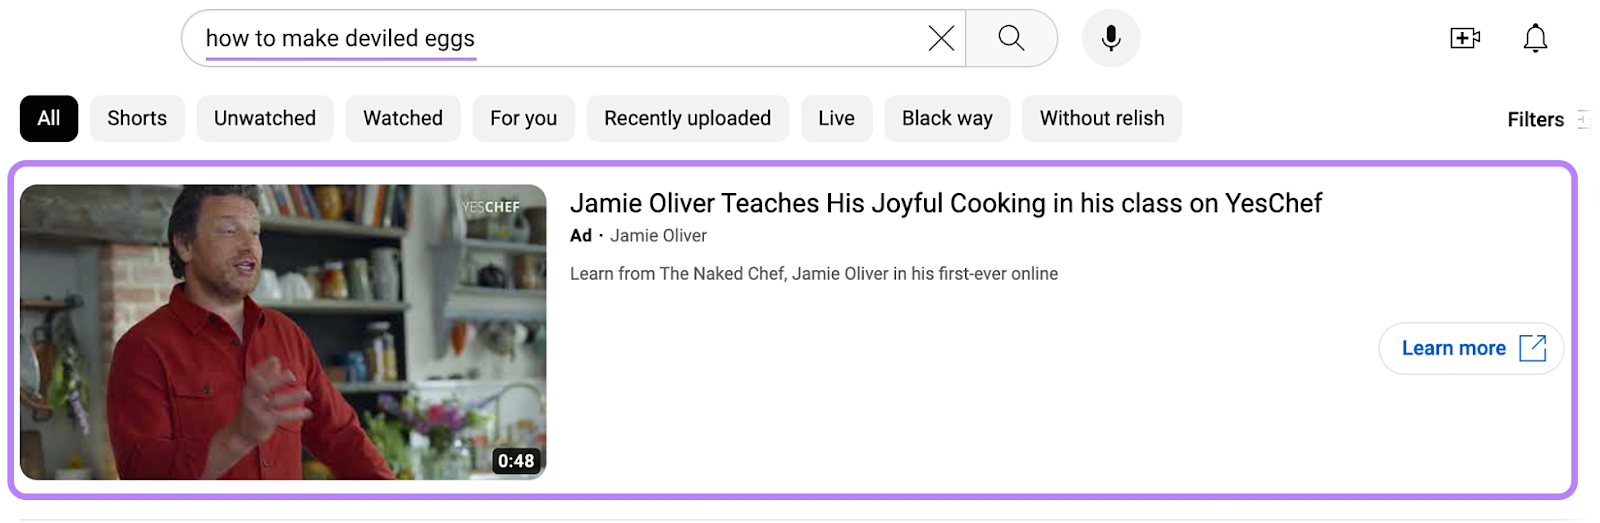 Jamie Oliver's cooking ad for "،w to make deviled eggs" search on YouTube